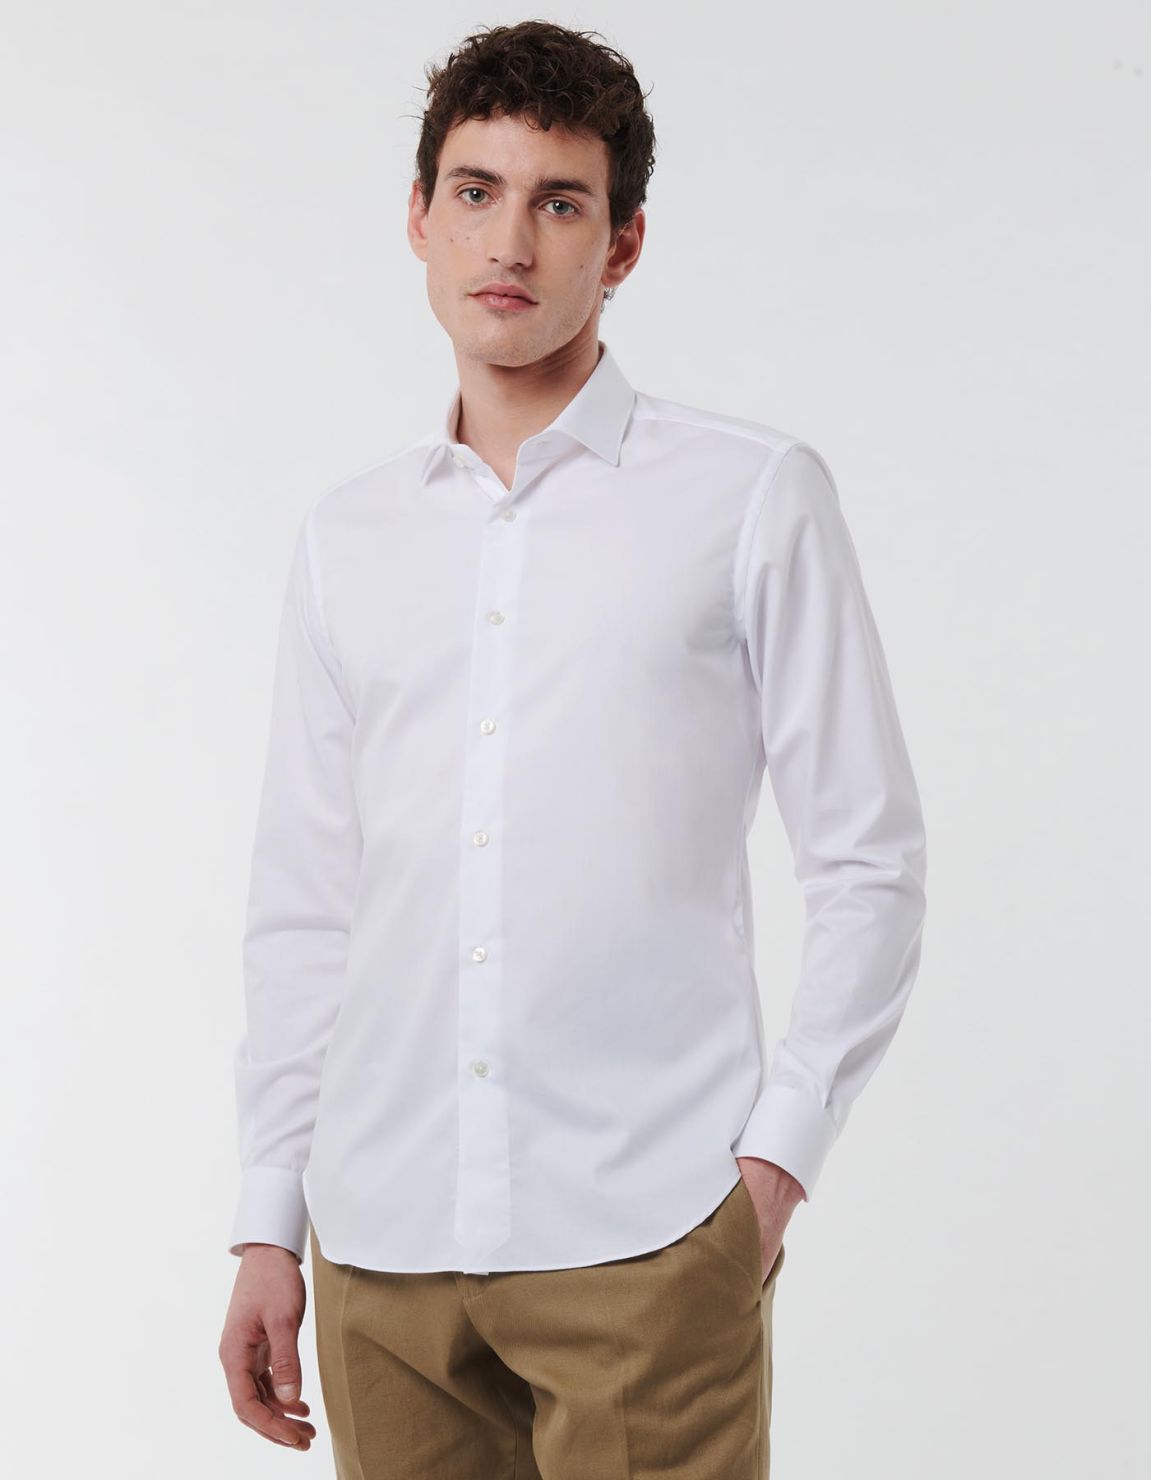 White Twill Solid colour Shirt Collar small cutaway Evolution Classic Fit 3